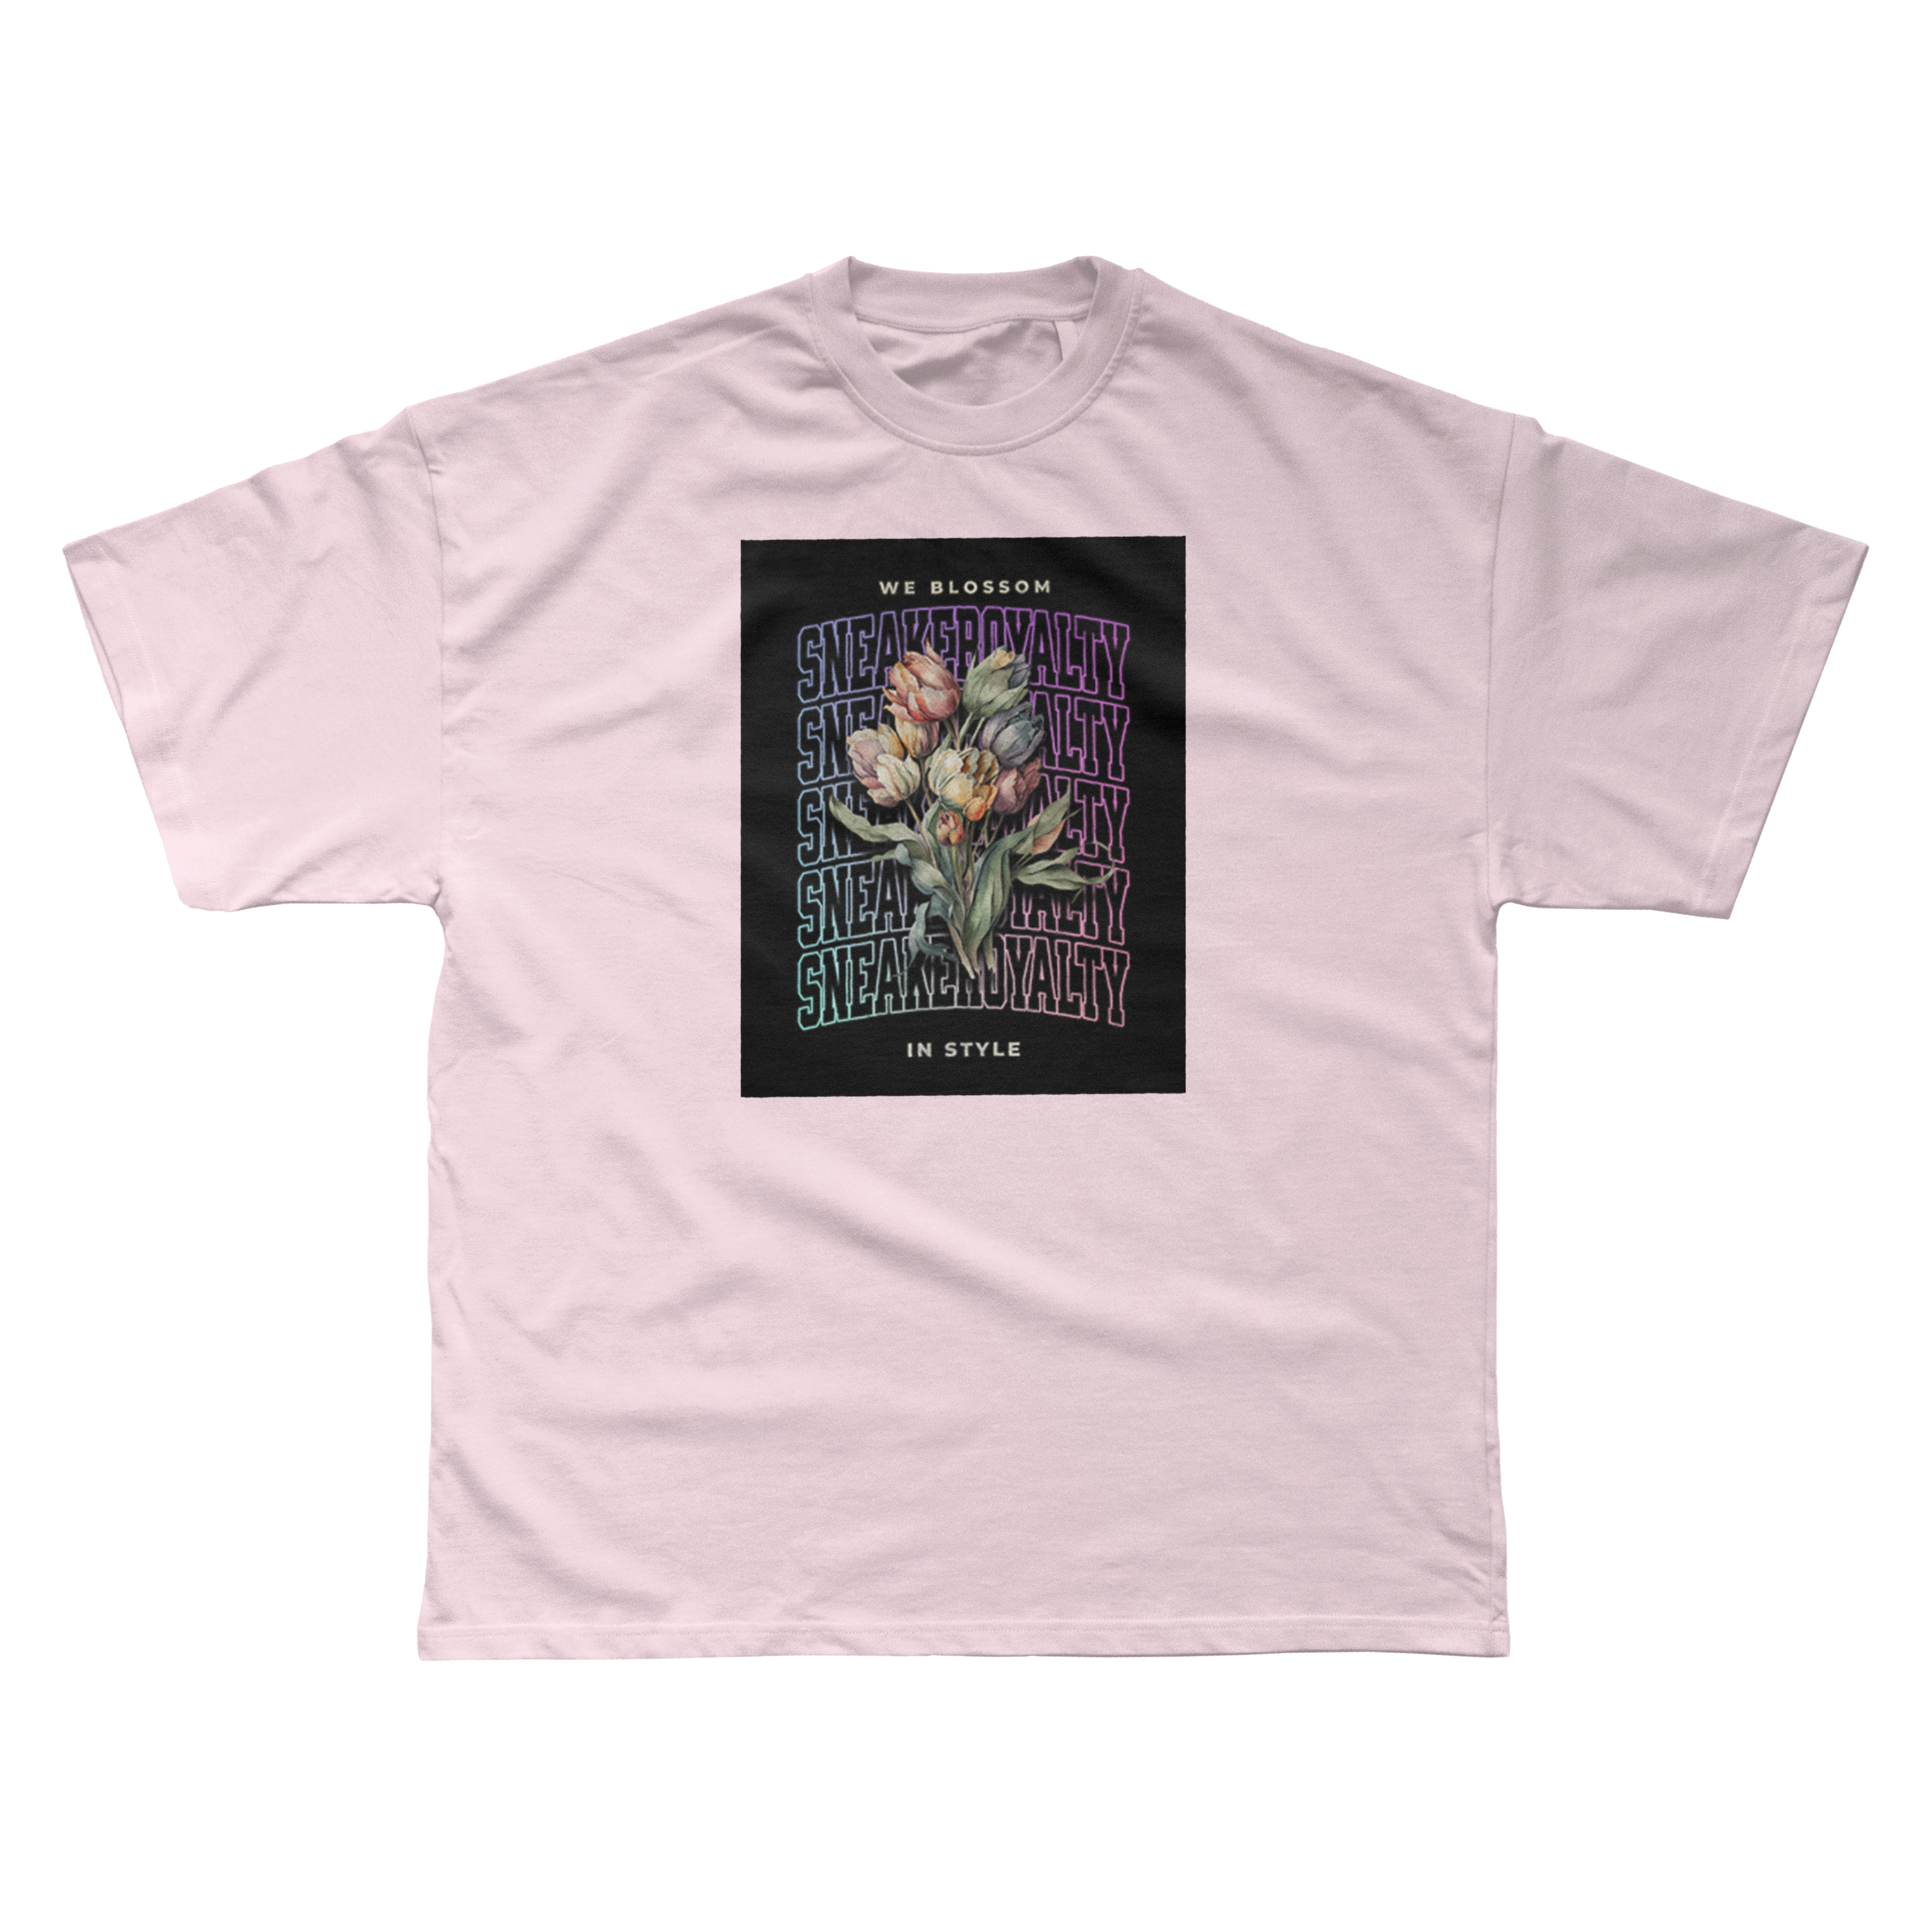 We Blossom In Style Tee - Pink